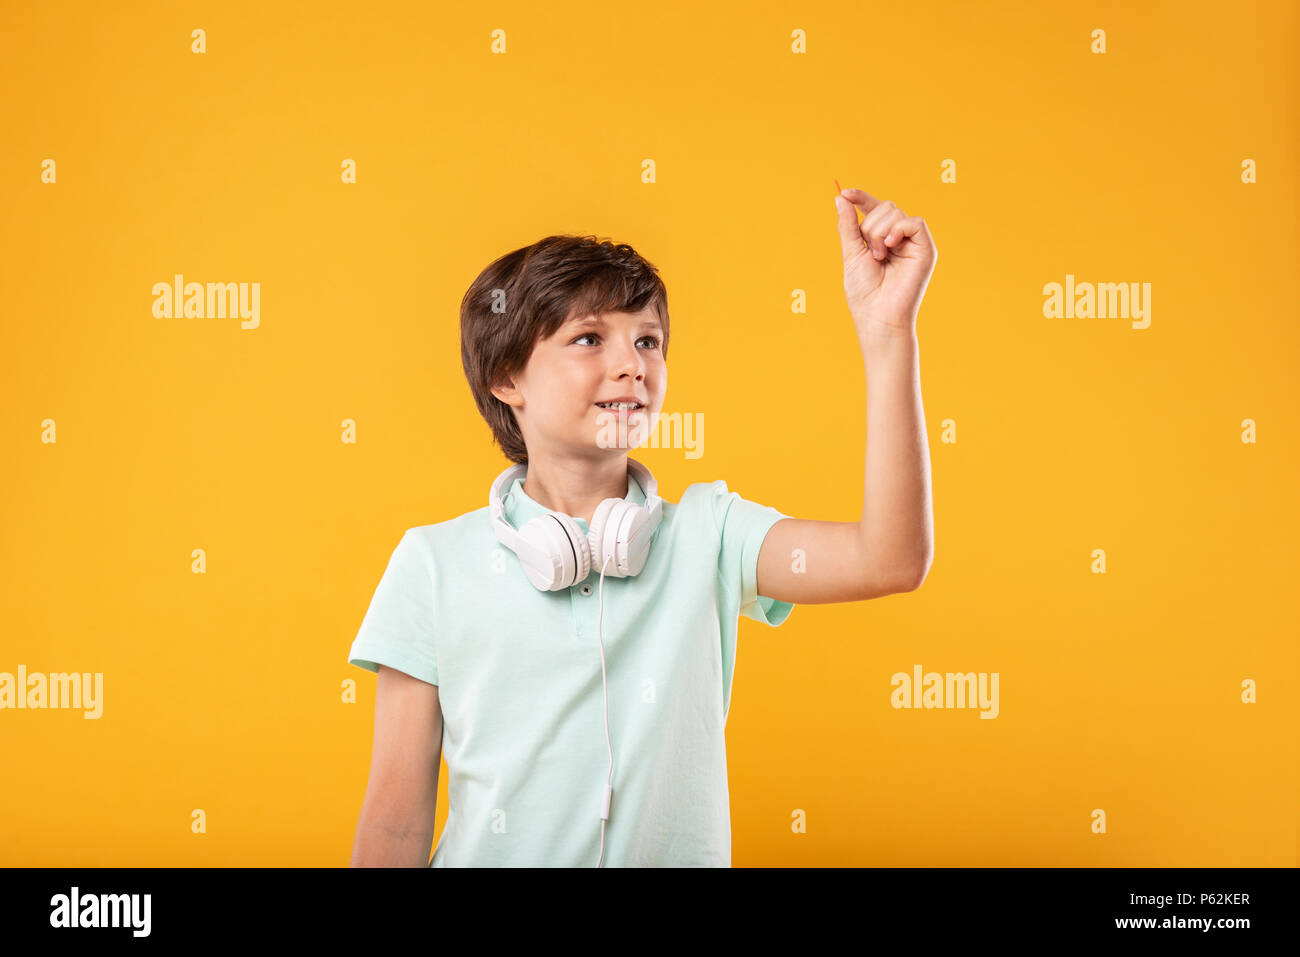 Cheerful preteen holding a tiny pin Stock Photo